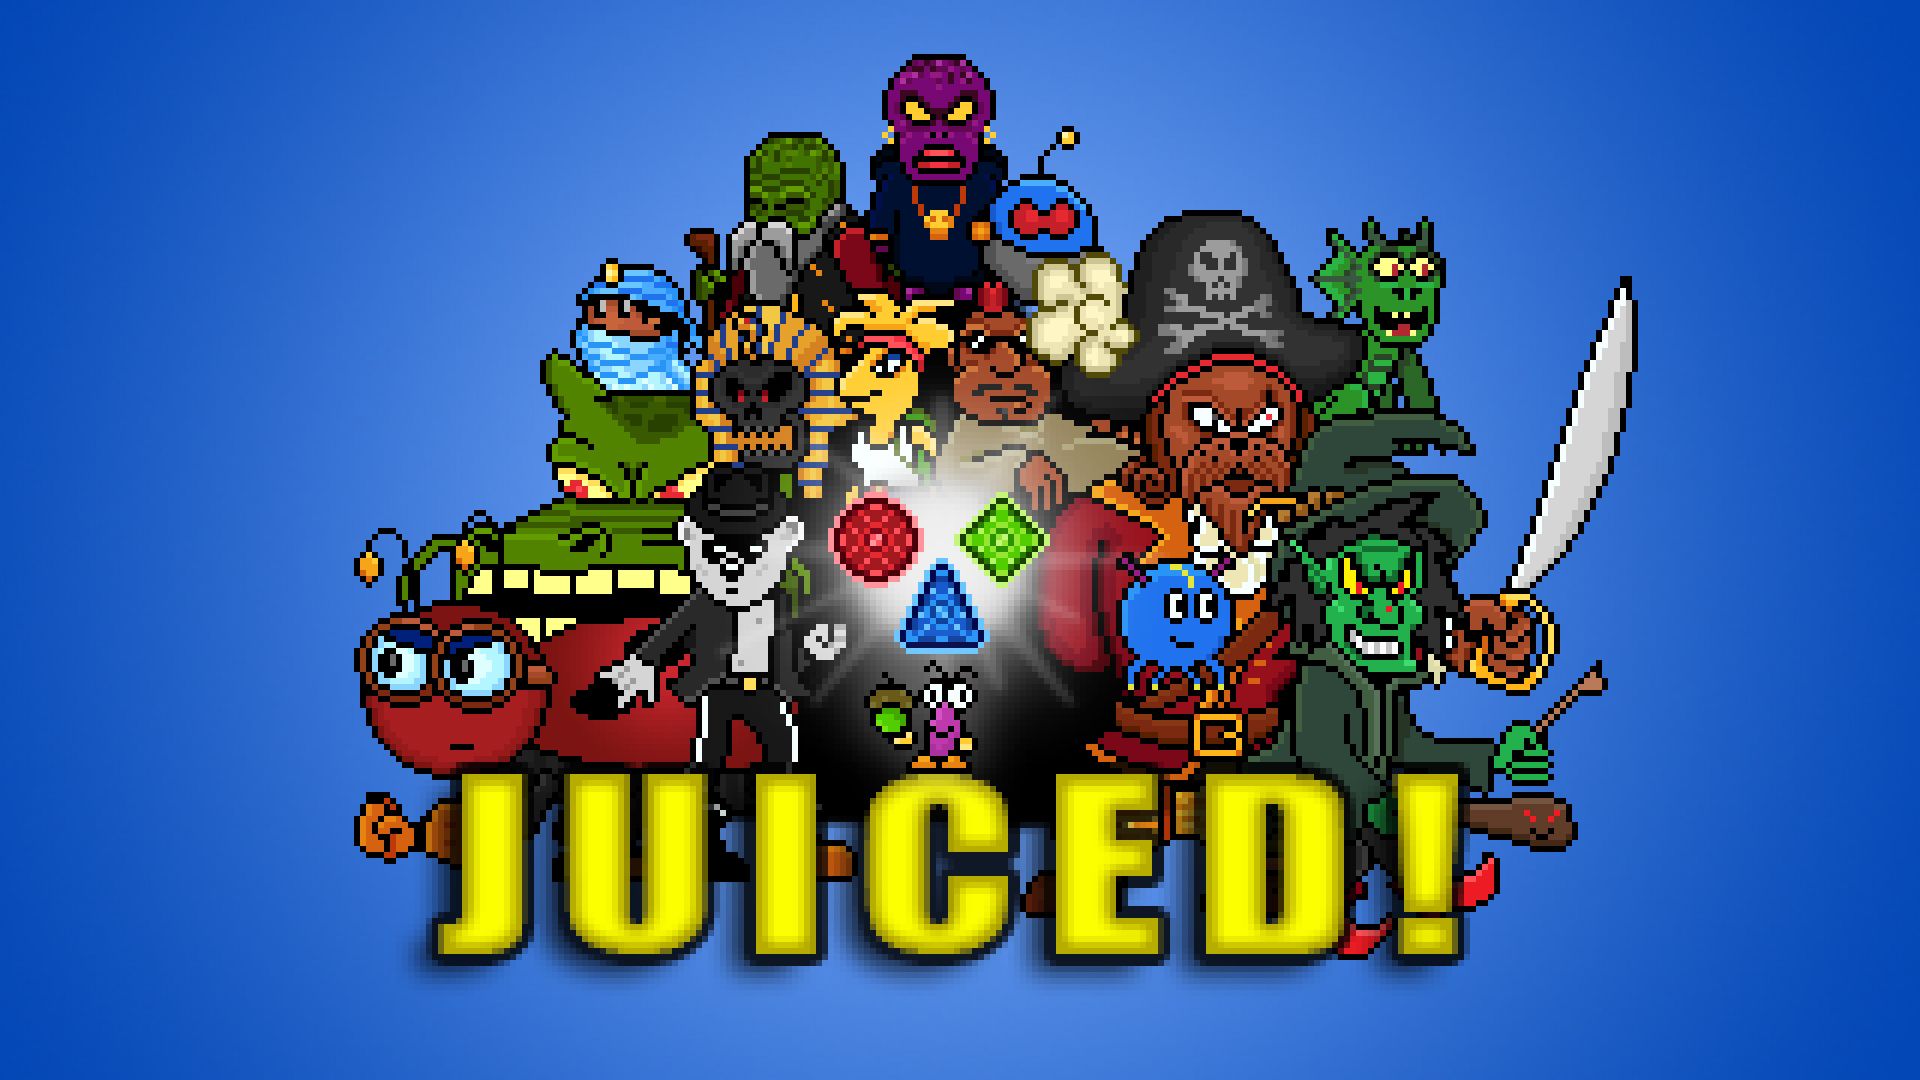 Juiced! - Switch Review (Quick)